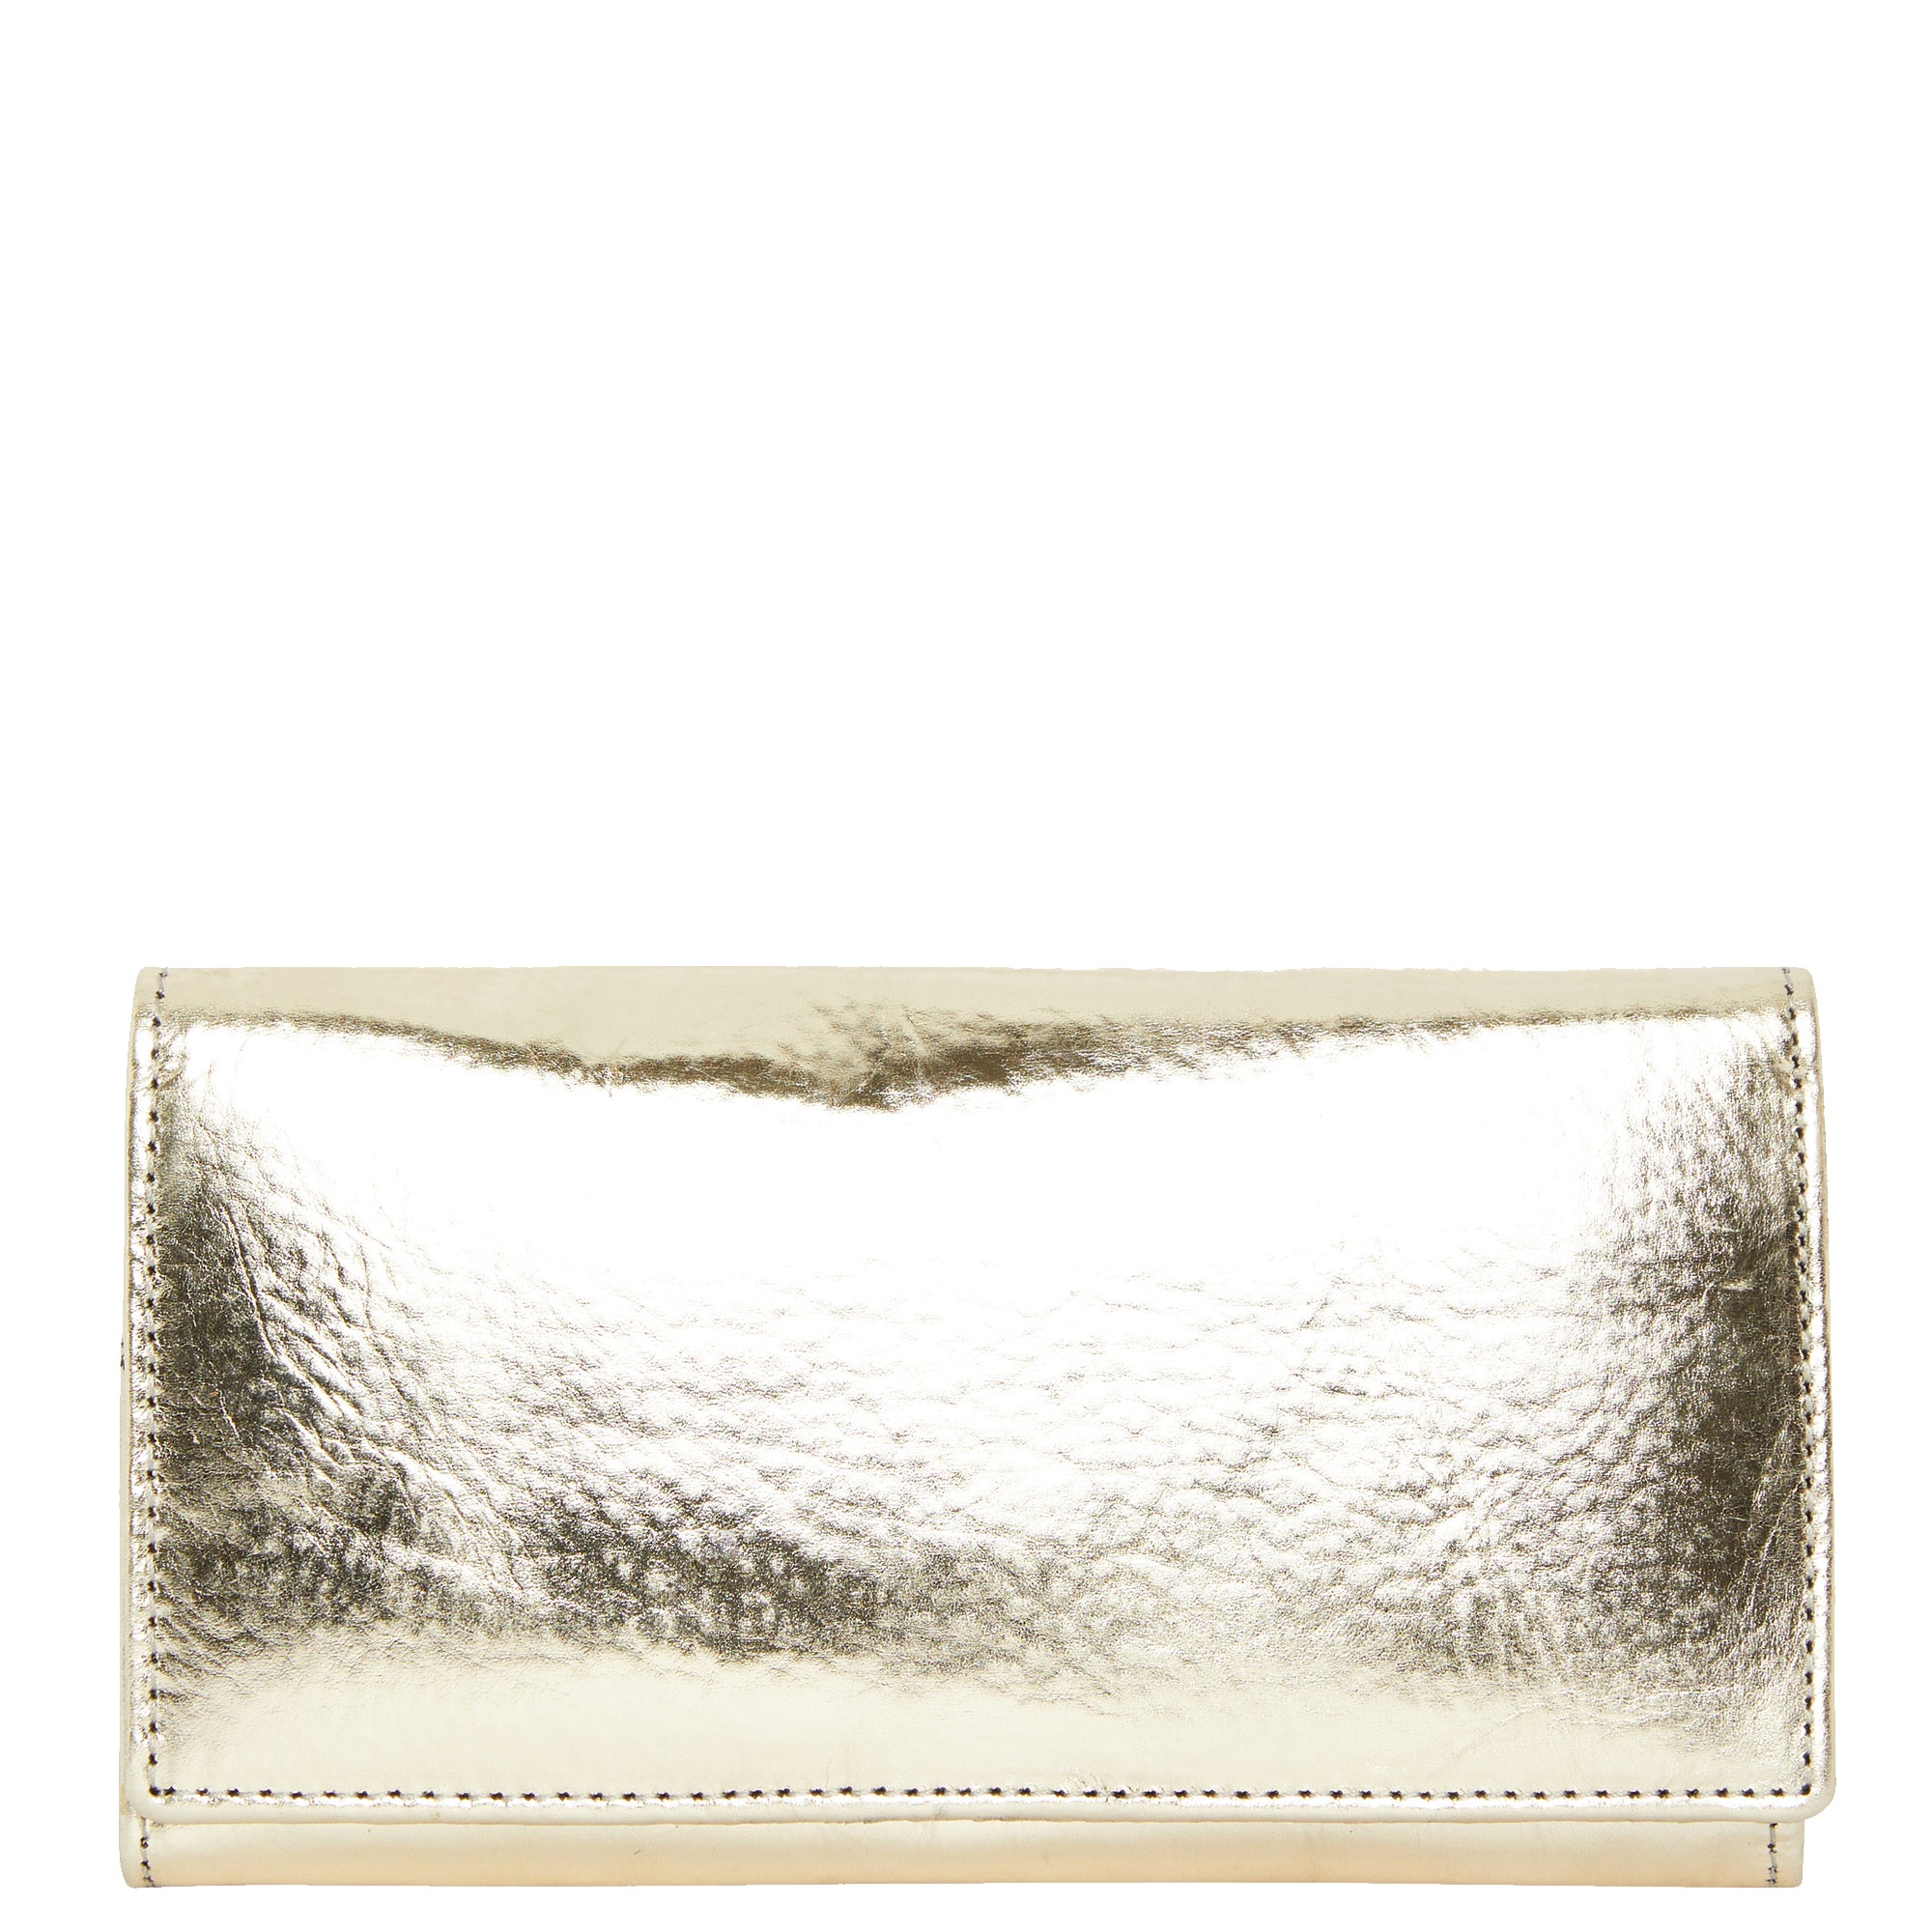 Brix + Bailey Women's Gold Leather Multi Section Purse